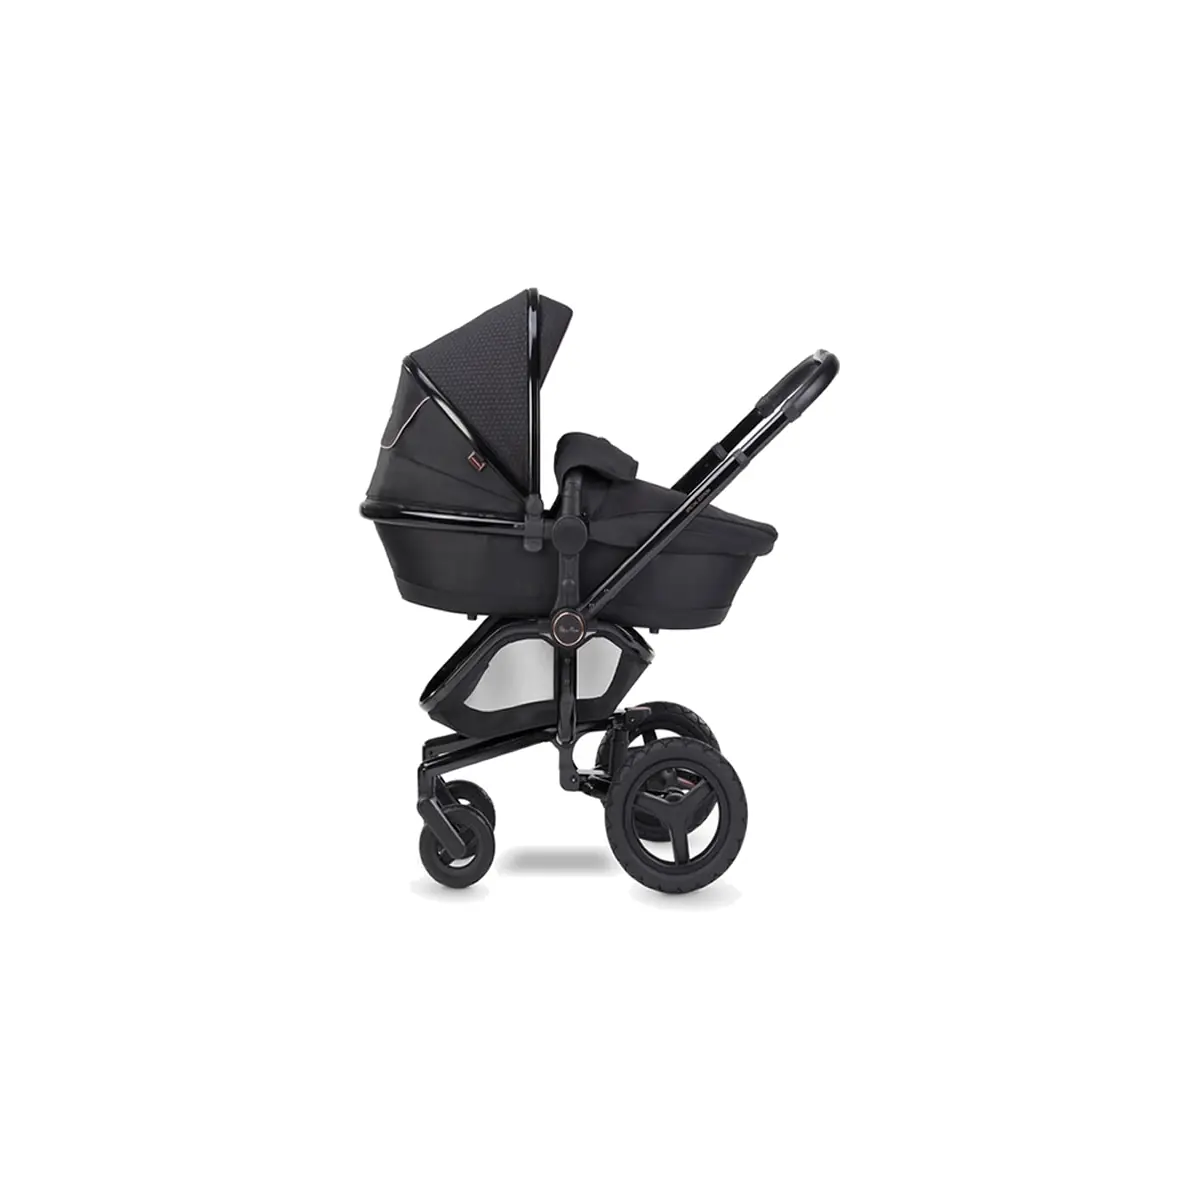 Silver Cross Surf Pram System- Eclipse (Clearance)